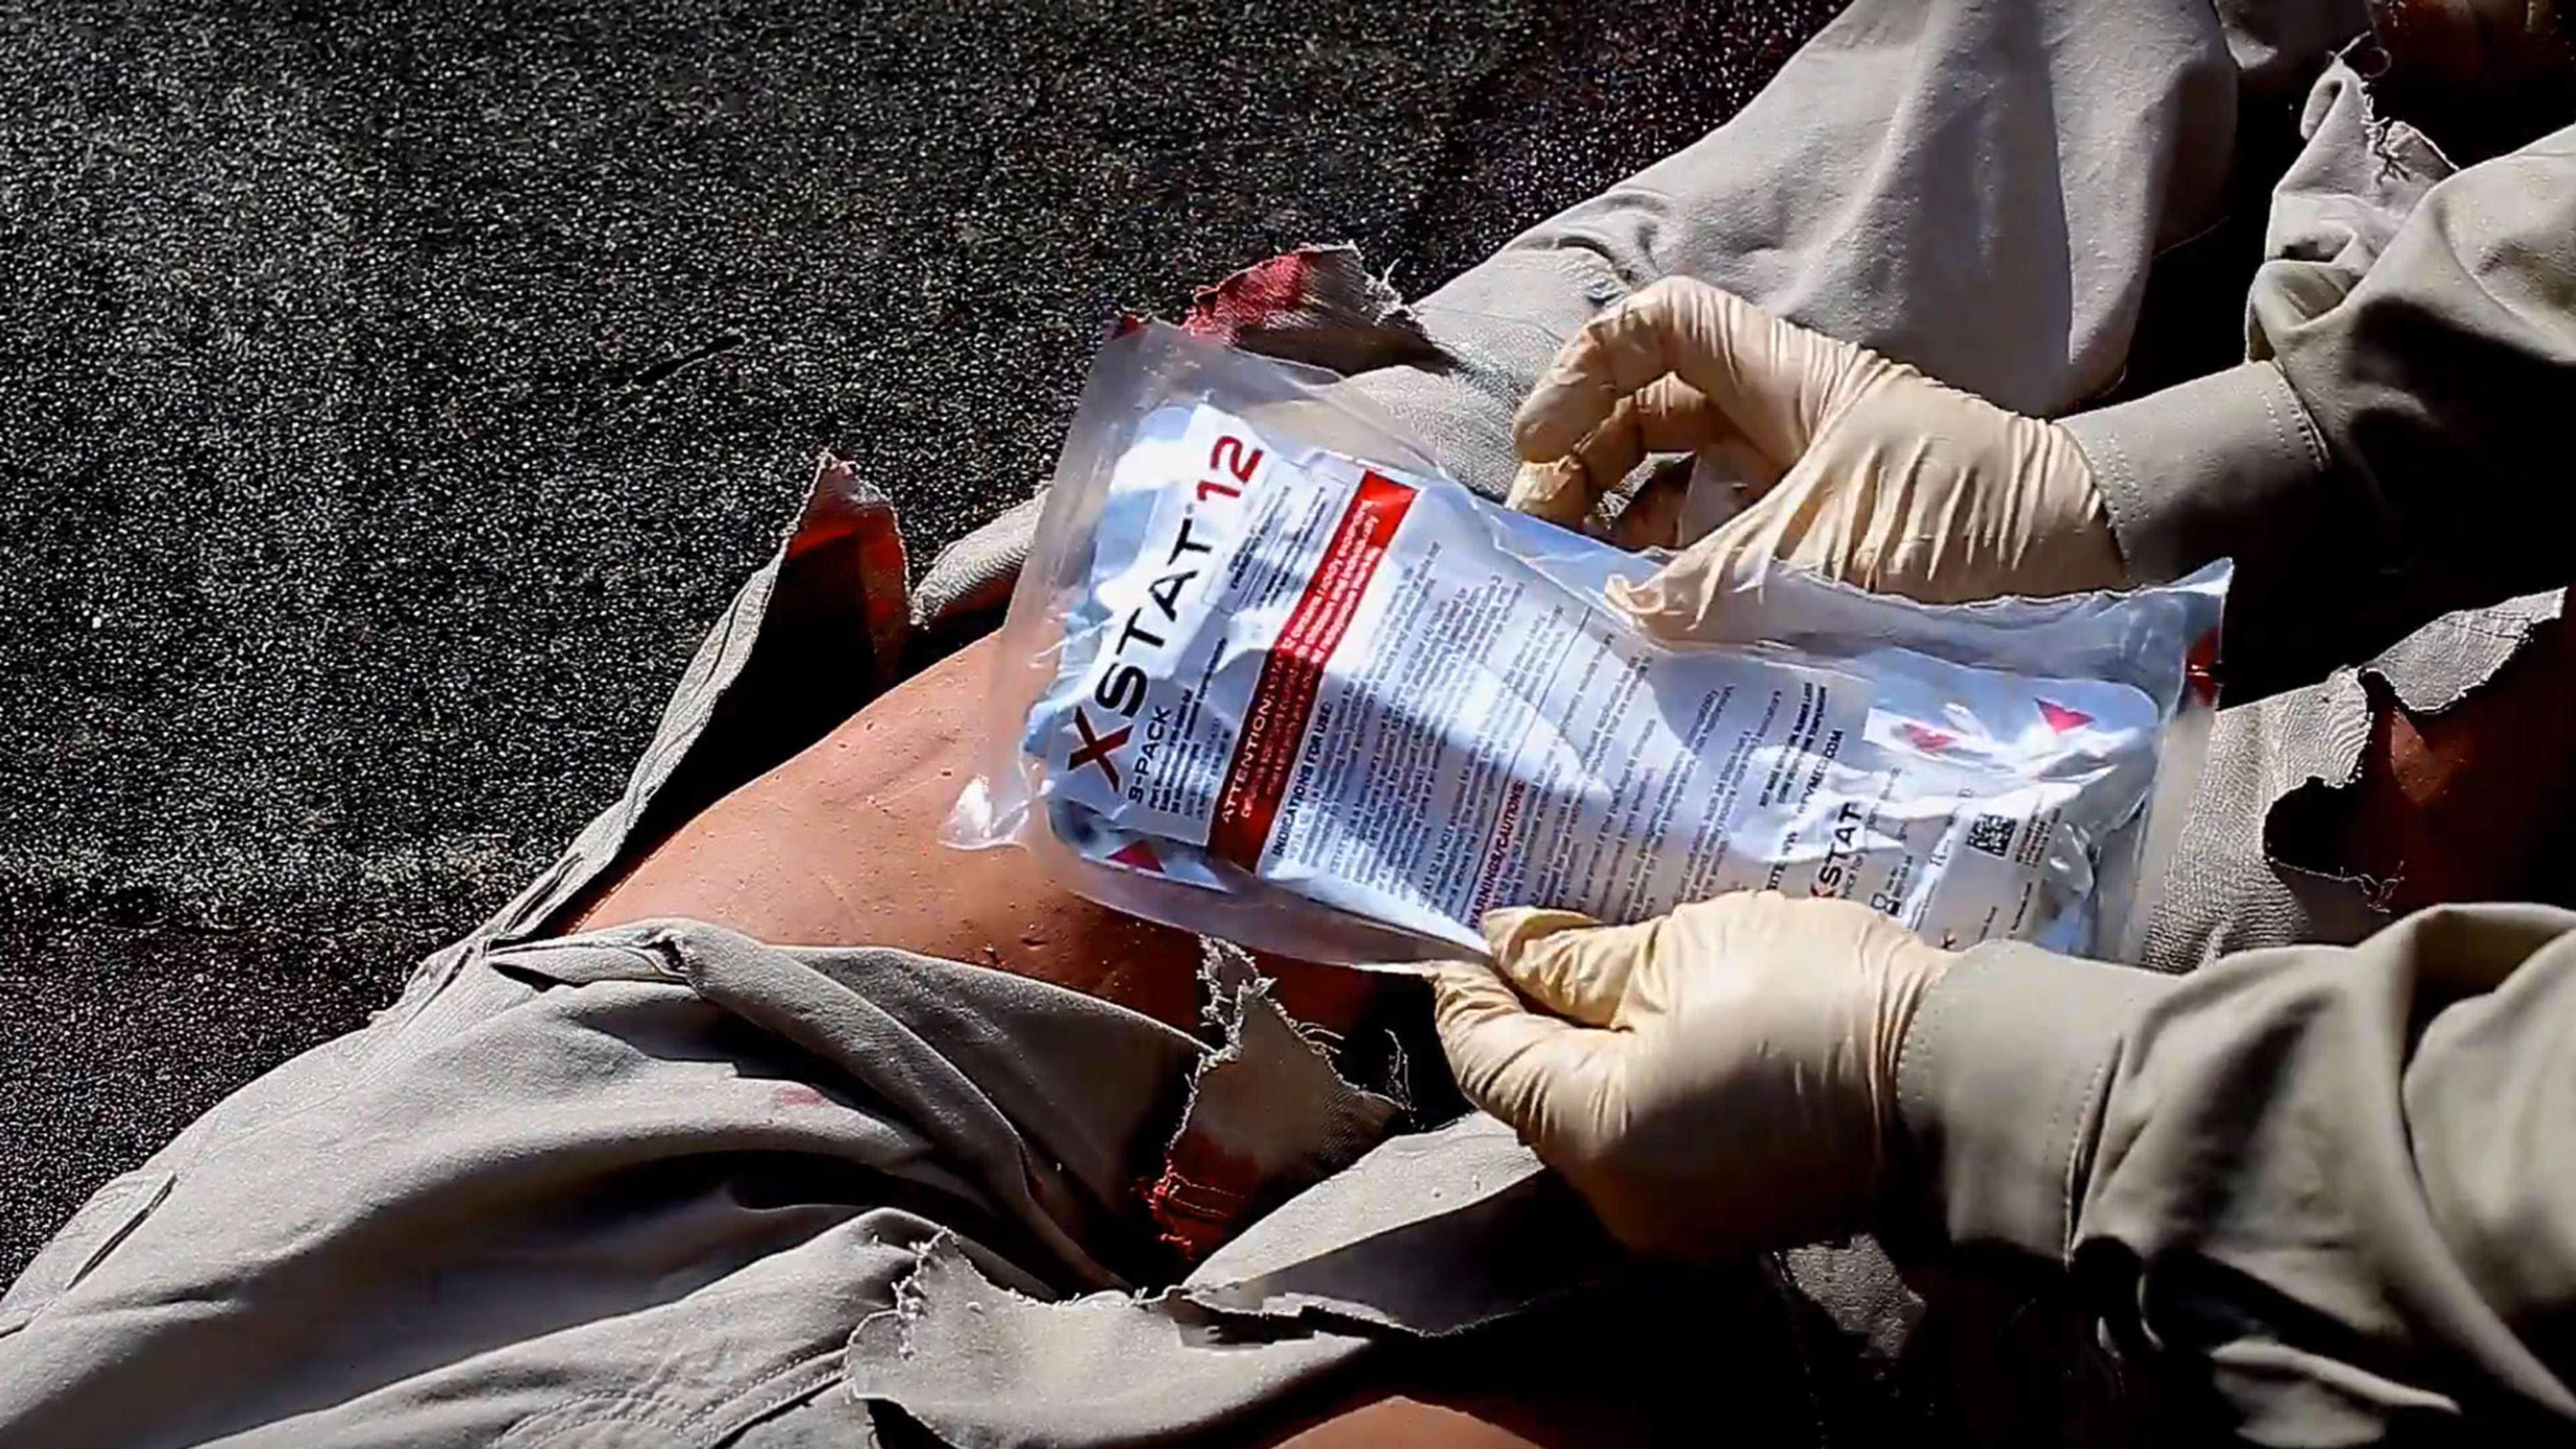 The FDA cleared this syringe for quickly plugging gunshot wounds in the arms and legs